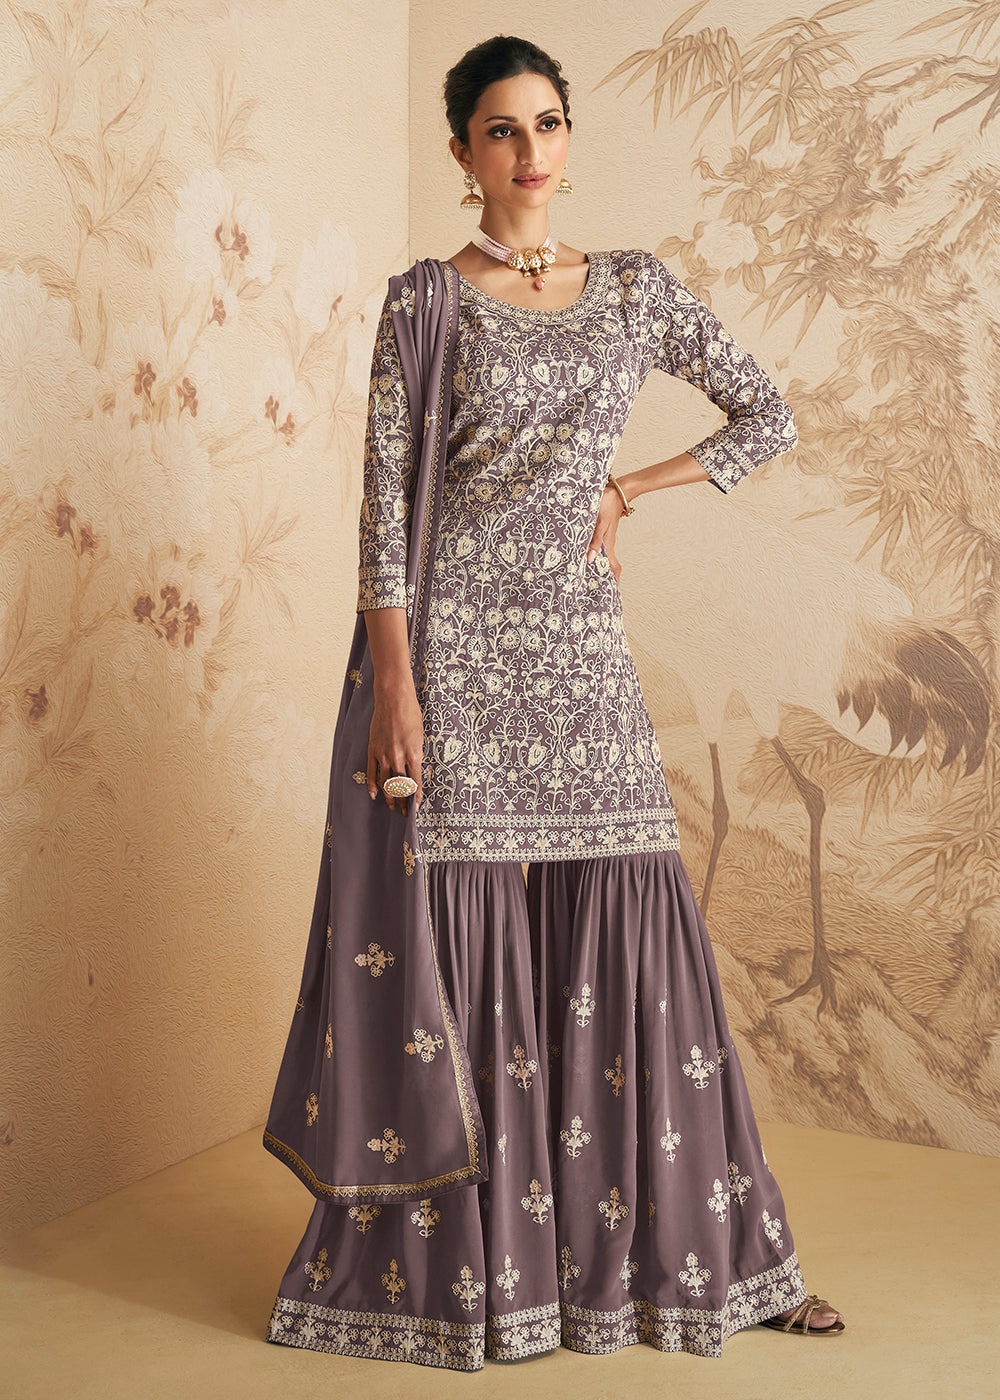 Shop Now Greyish Mauve Thread & Sequins Embroidered Designer Sharara Suit Online at Empress Clothing in USA, UK, Canada, Germany & Worldwide.